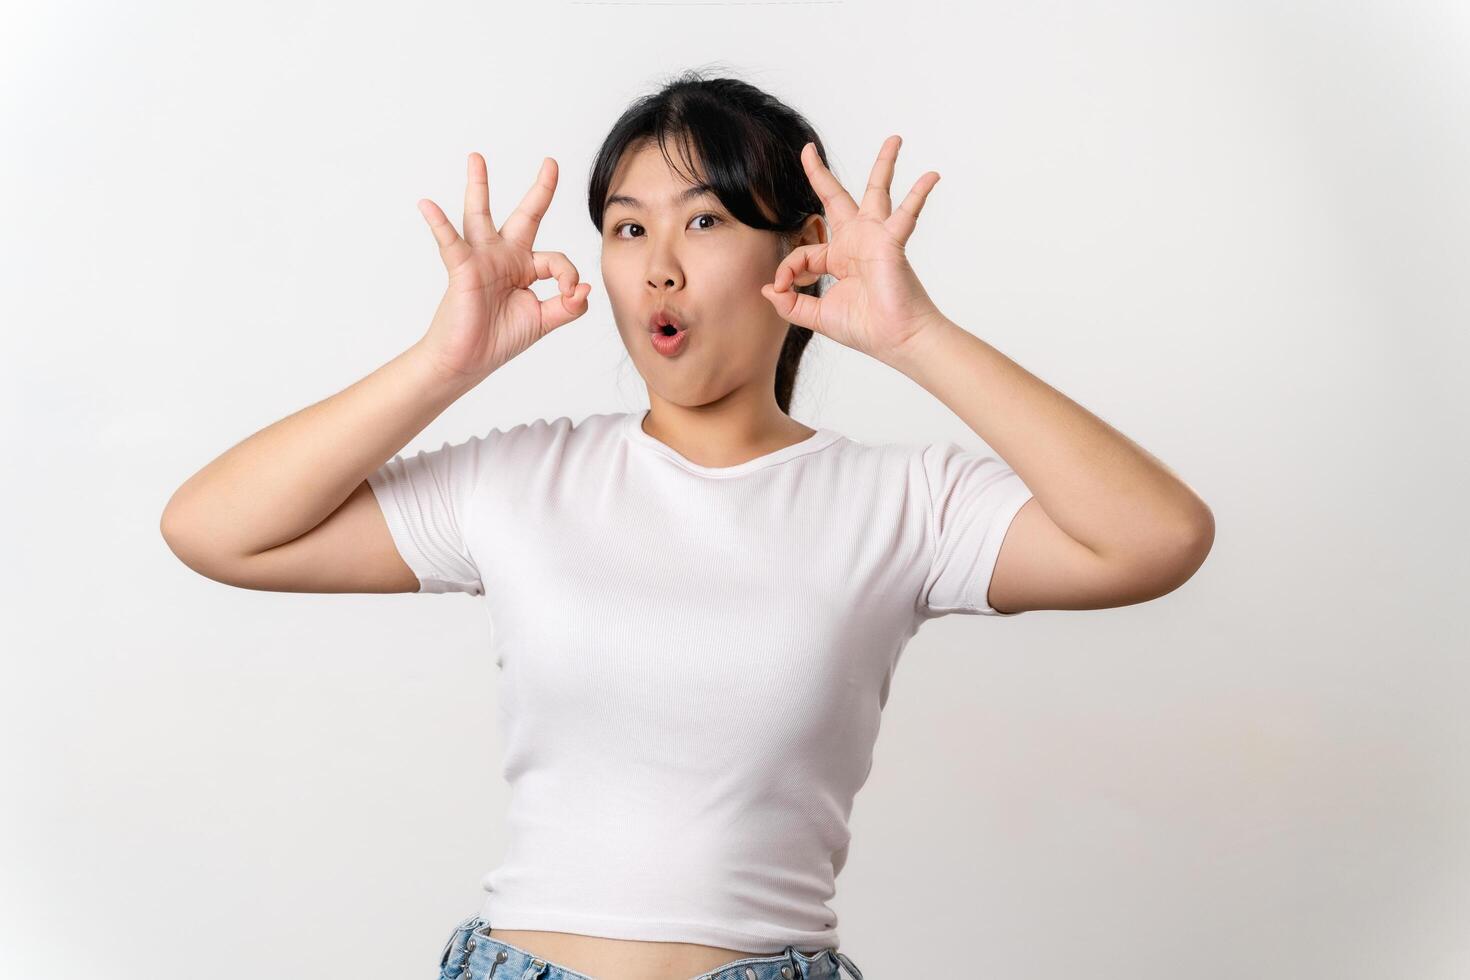 The cheerful young Asian woman smiling and showing the OK hand sign standing on white background. photo